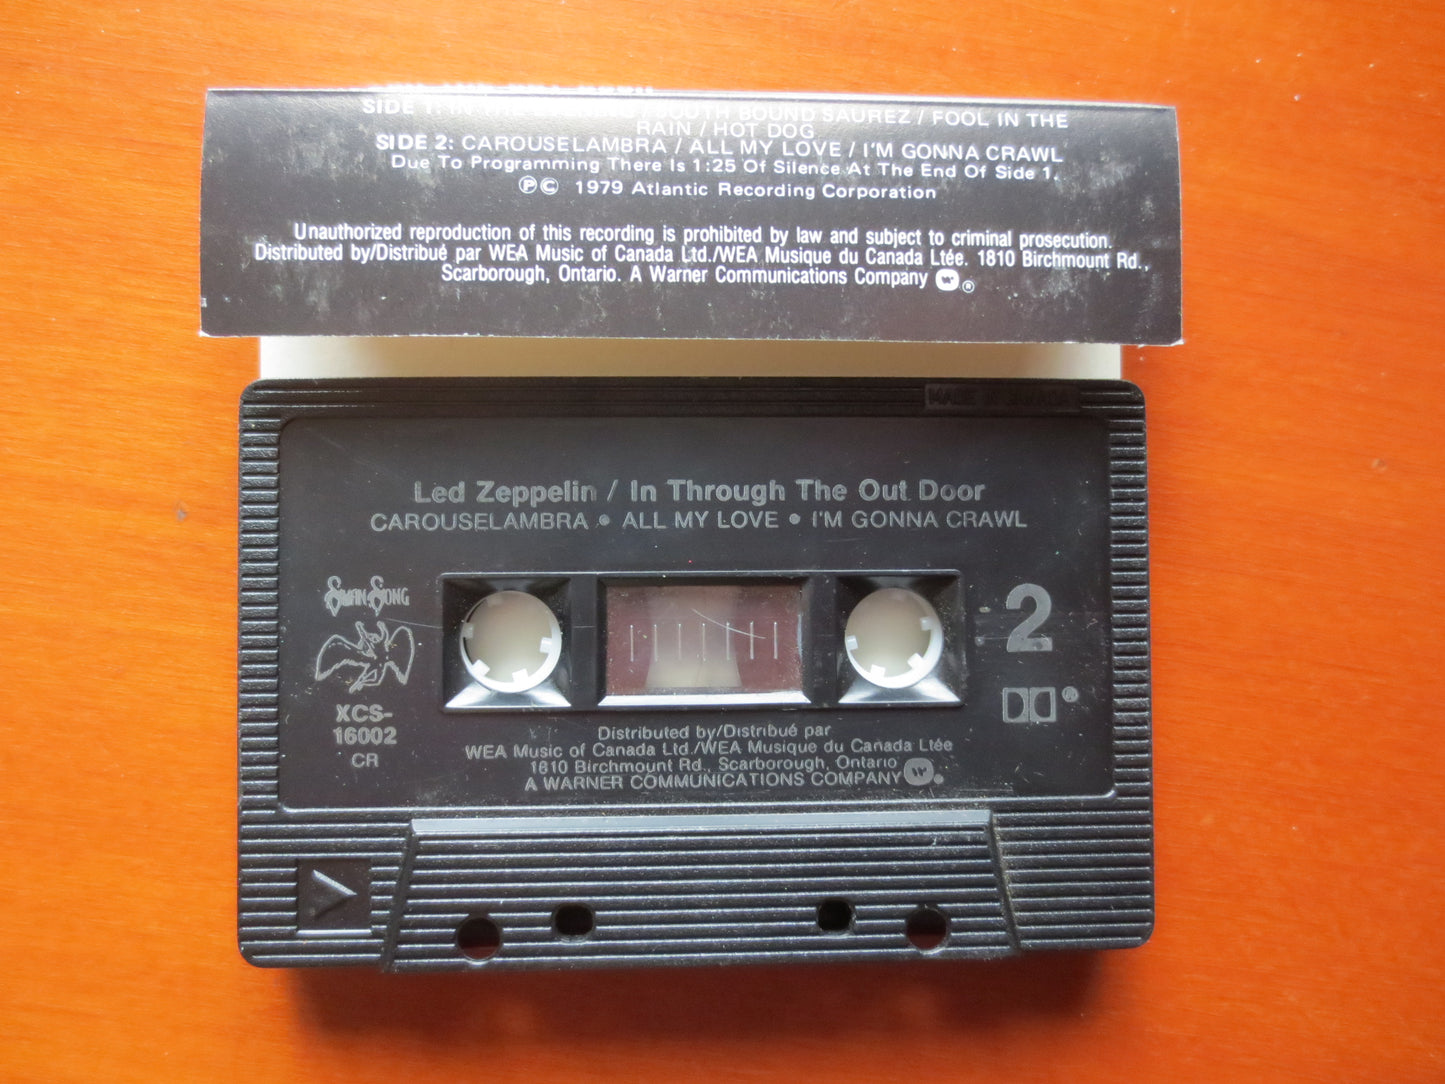 Led ZEPPELIN Tape, In Through the Out Door, Led ZEPPELIN Album, Led Zeppelin Music, Tape Cassette, Cassette, 1979 Cassette